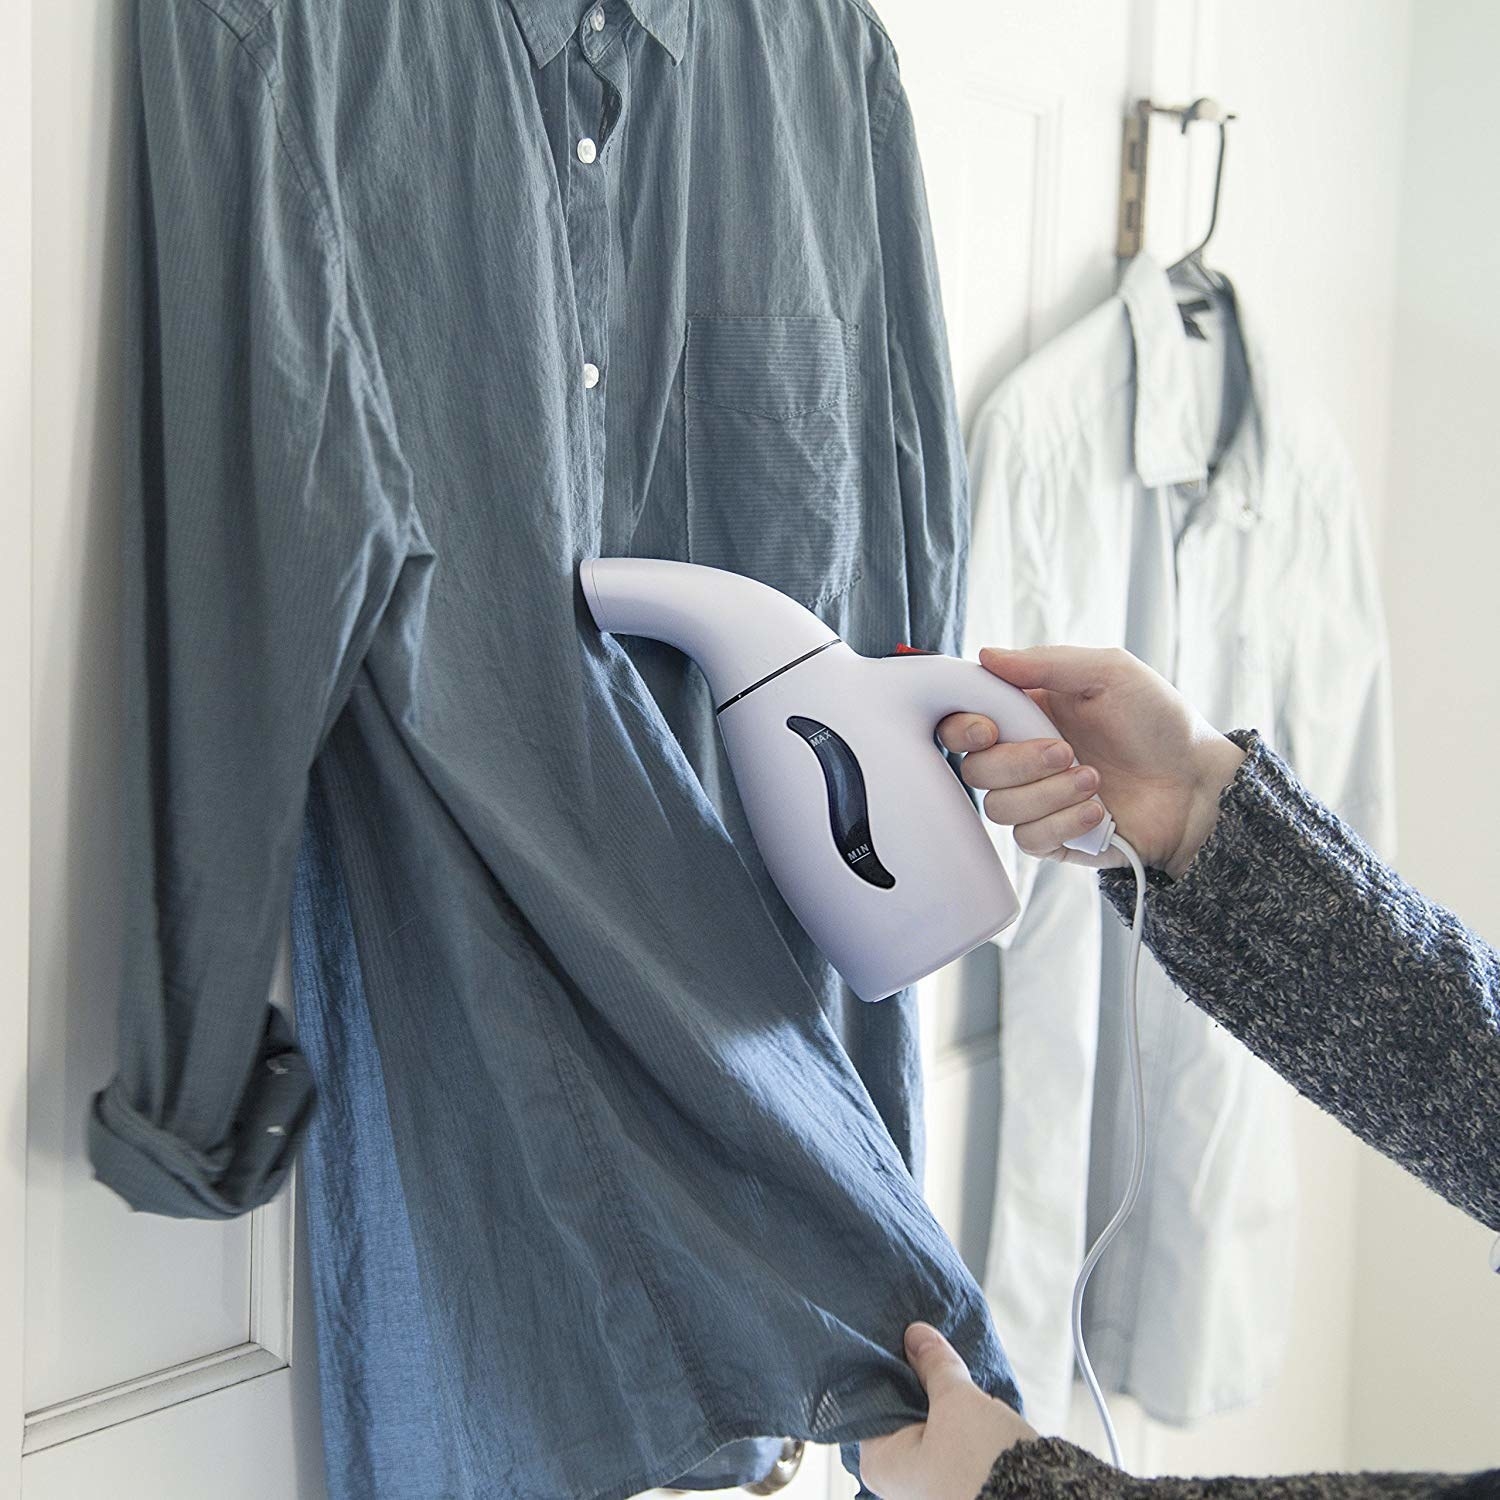 A person using a small handheld steamer on their button up shirt